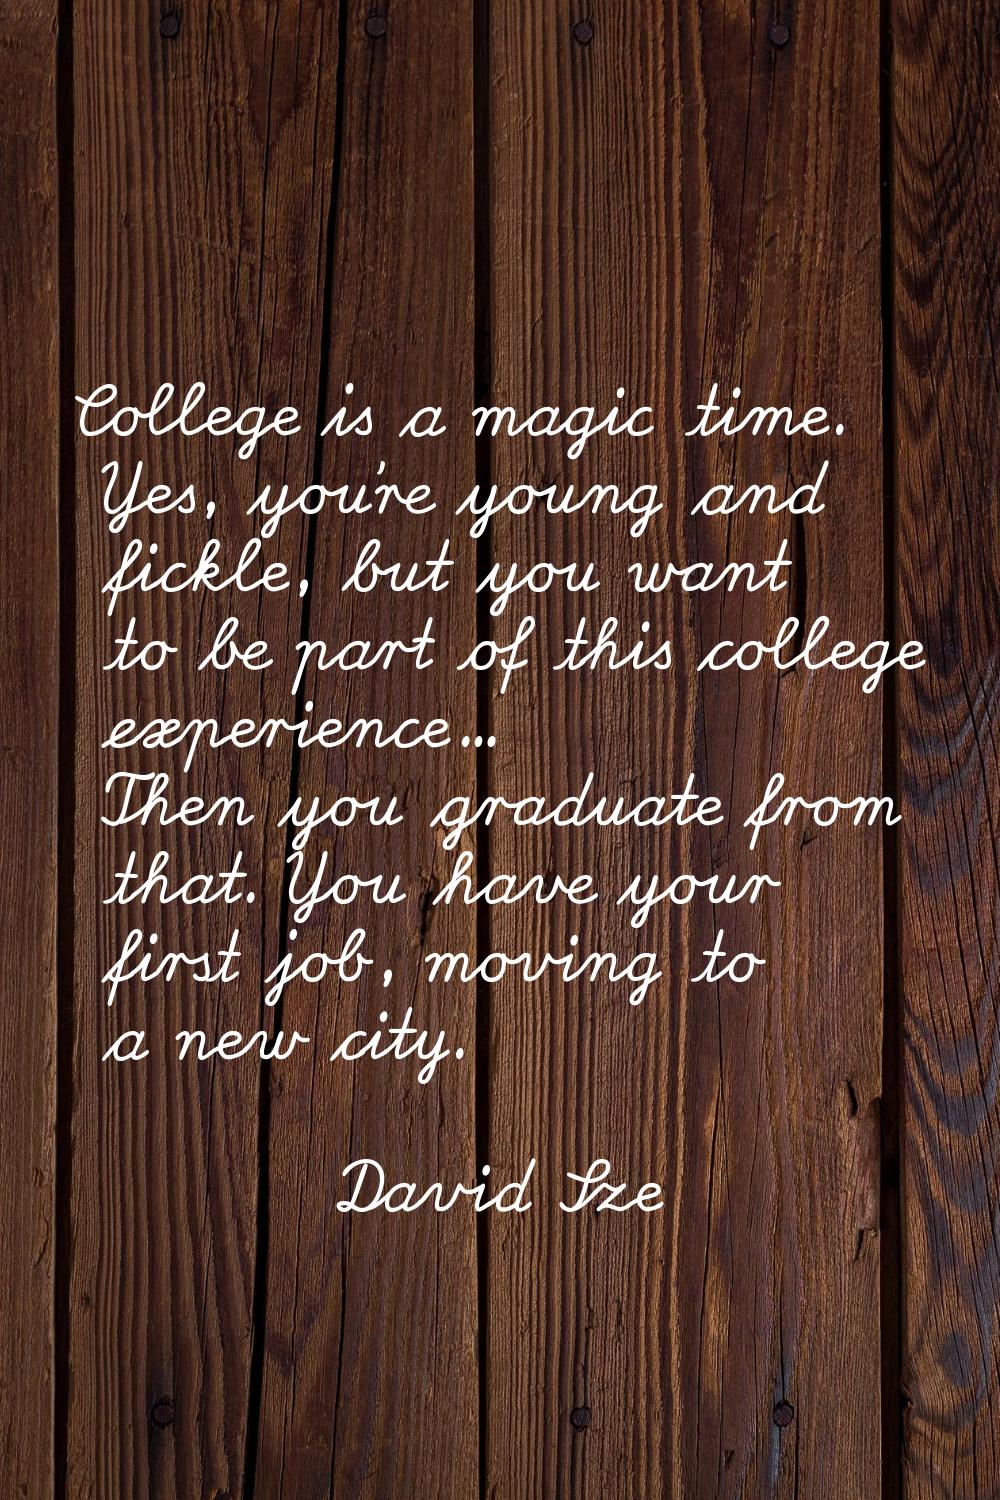 College is a magic time. Yes, you're young and fickle, but you want to be part of this college expe